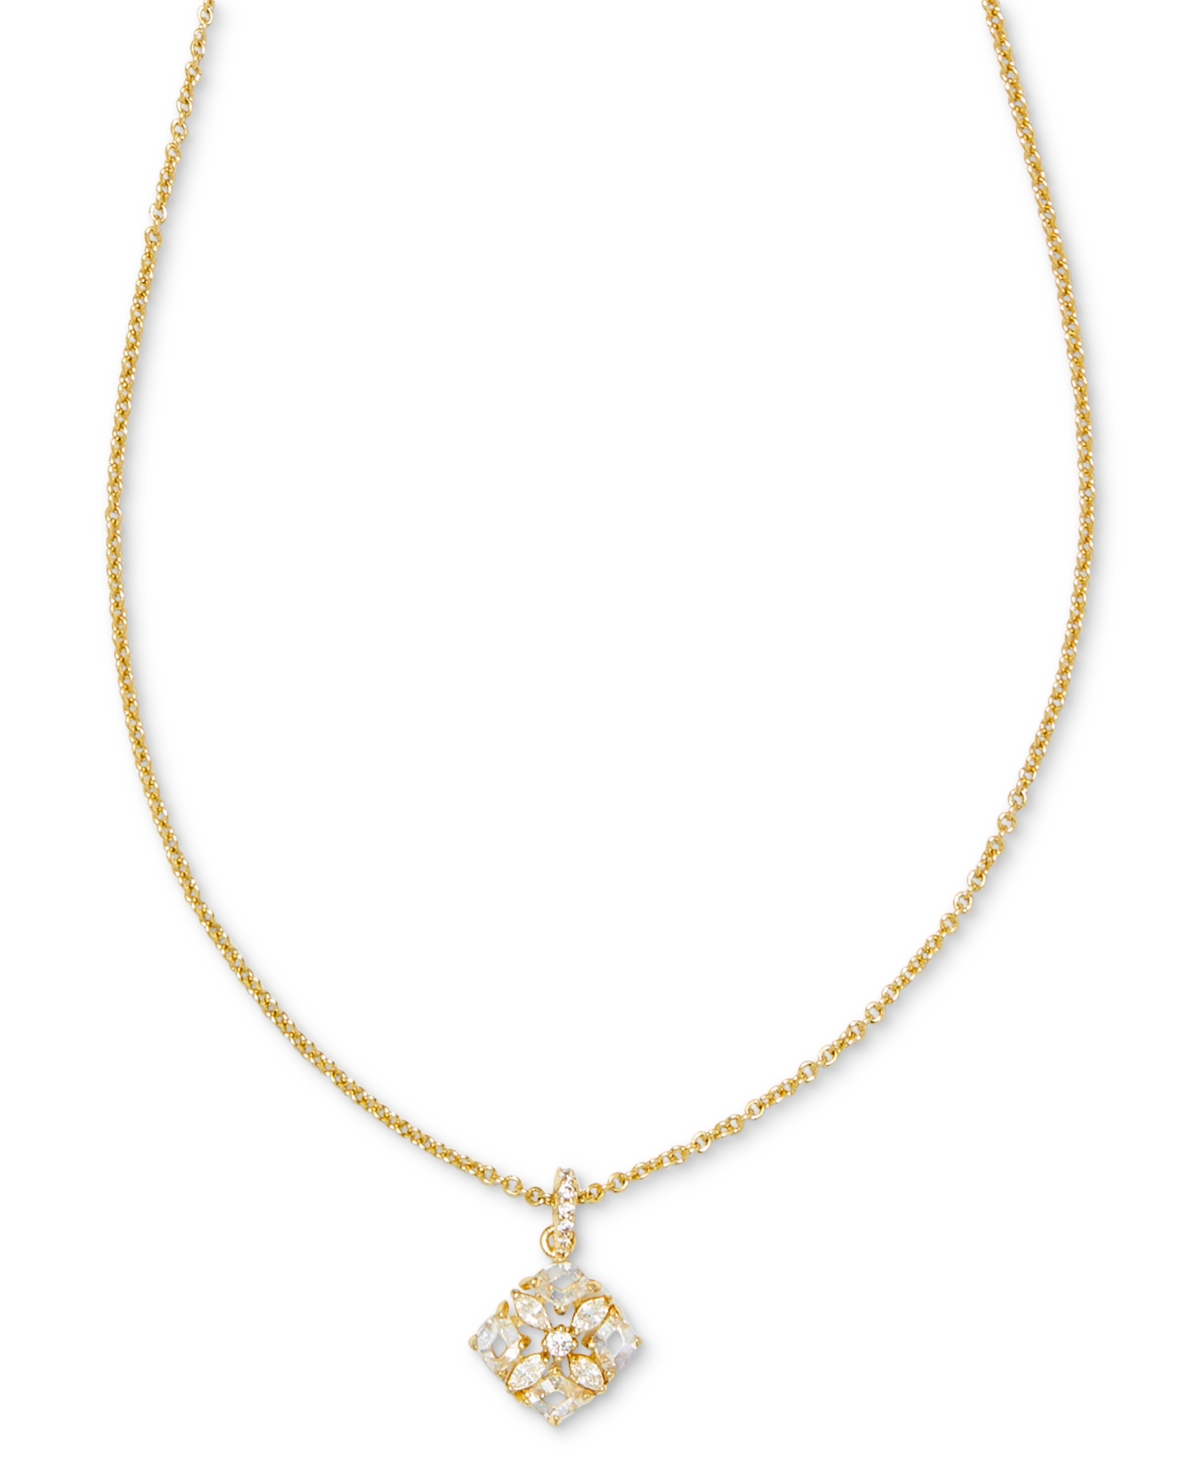 14k Gold-Plated Mixed Cubic Zirconia 19" Adjustable Pendant Necklace - Pink Mix